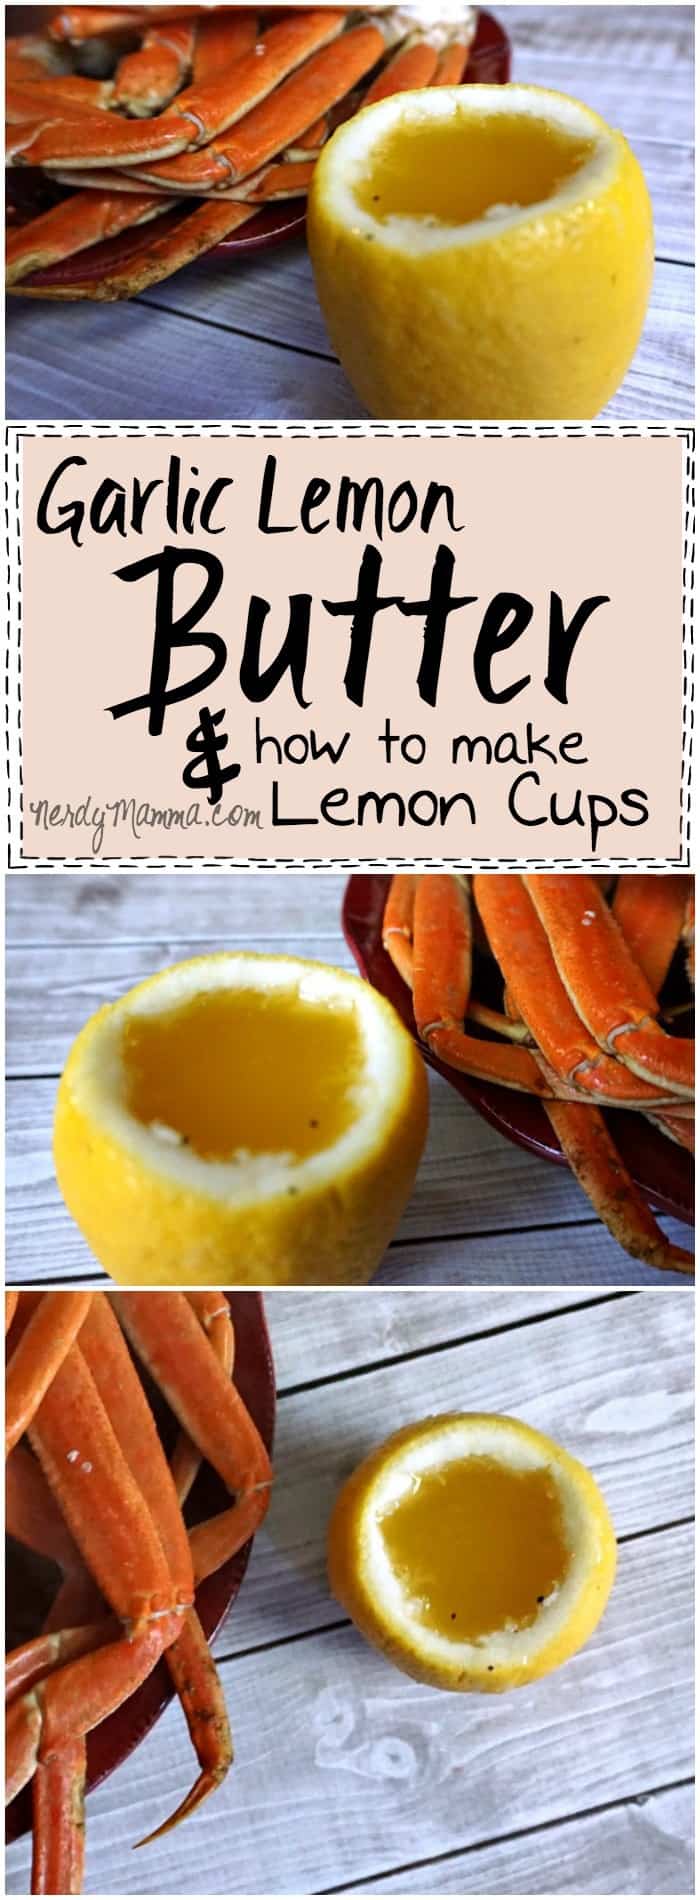 This recipe for garlic lemon butter is genius...and the lemon cups--why didn't I think of that!